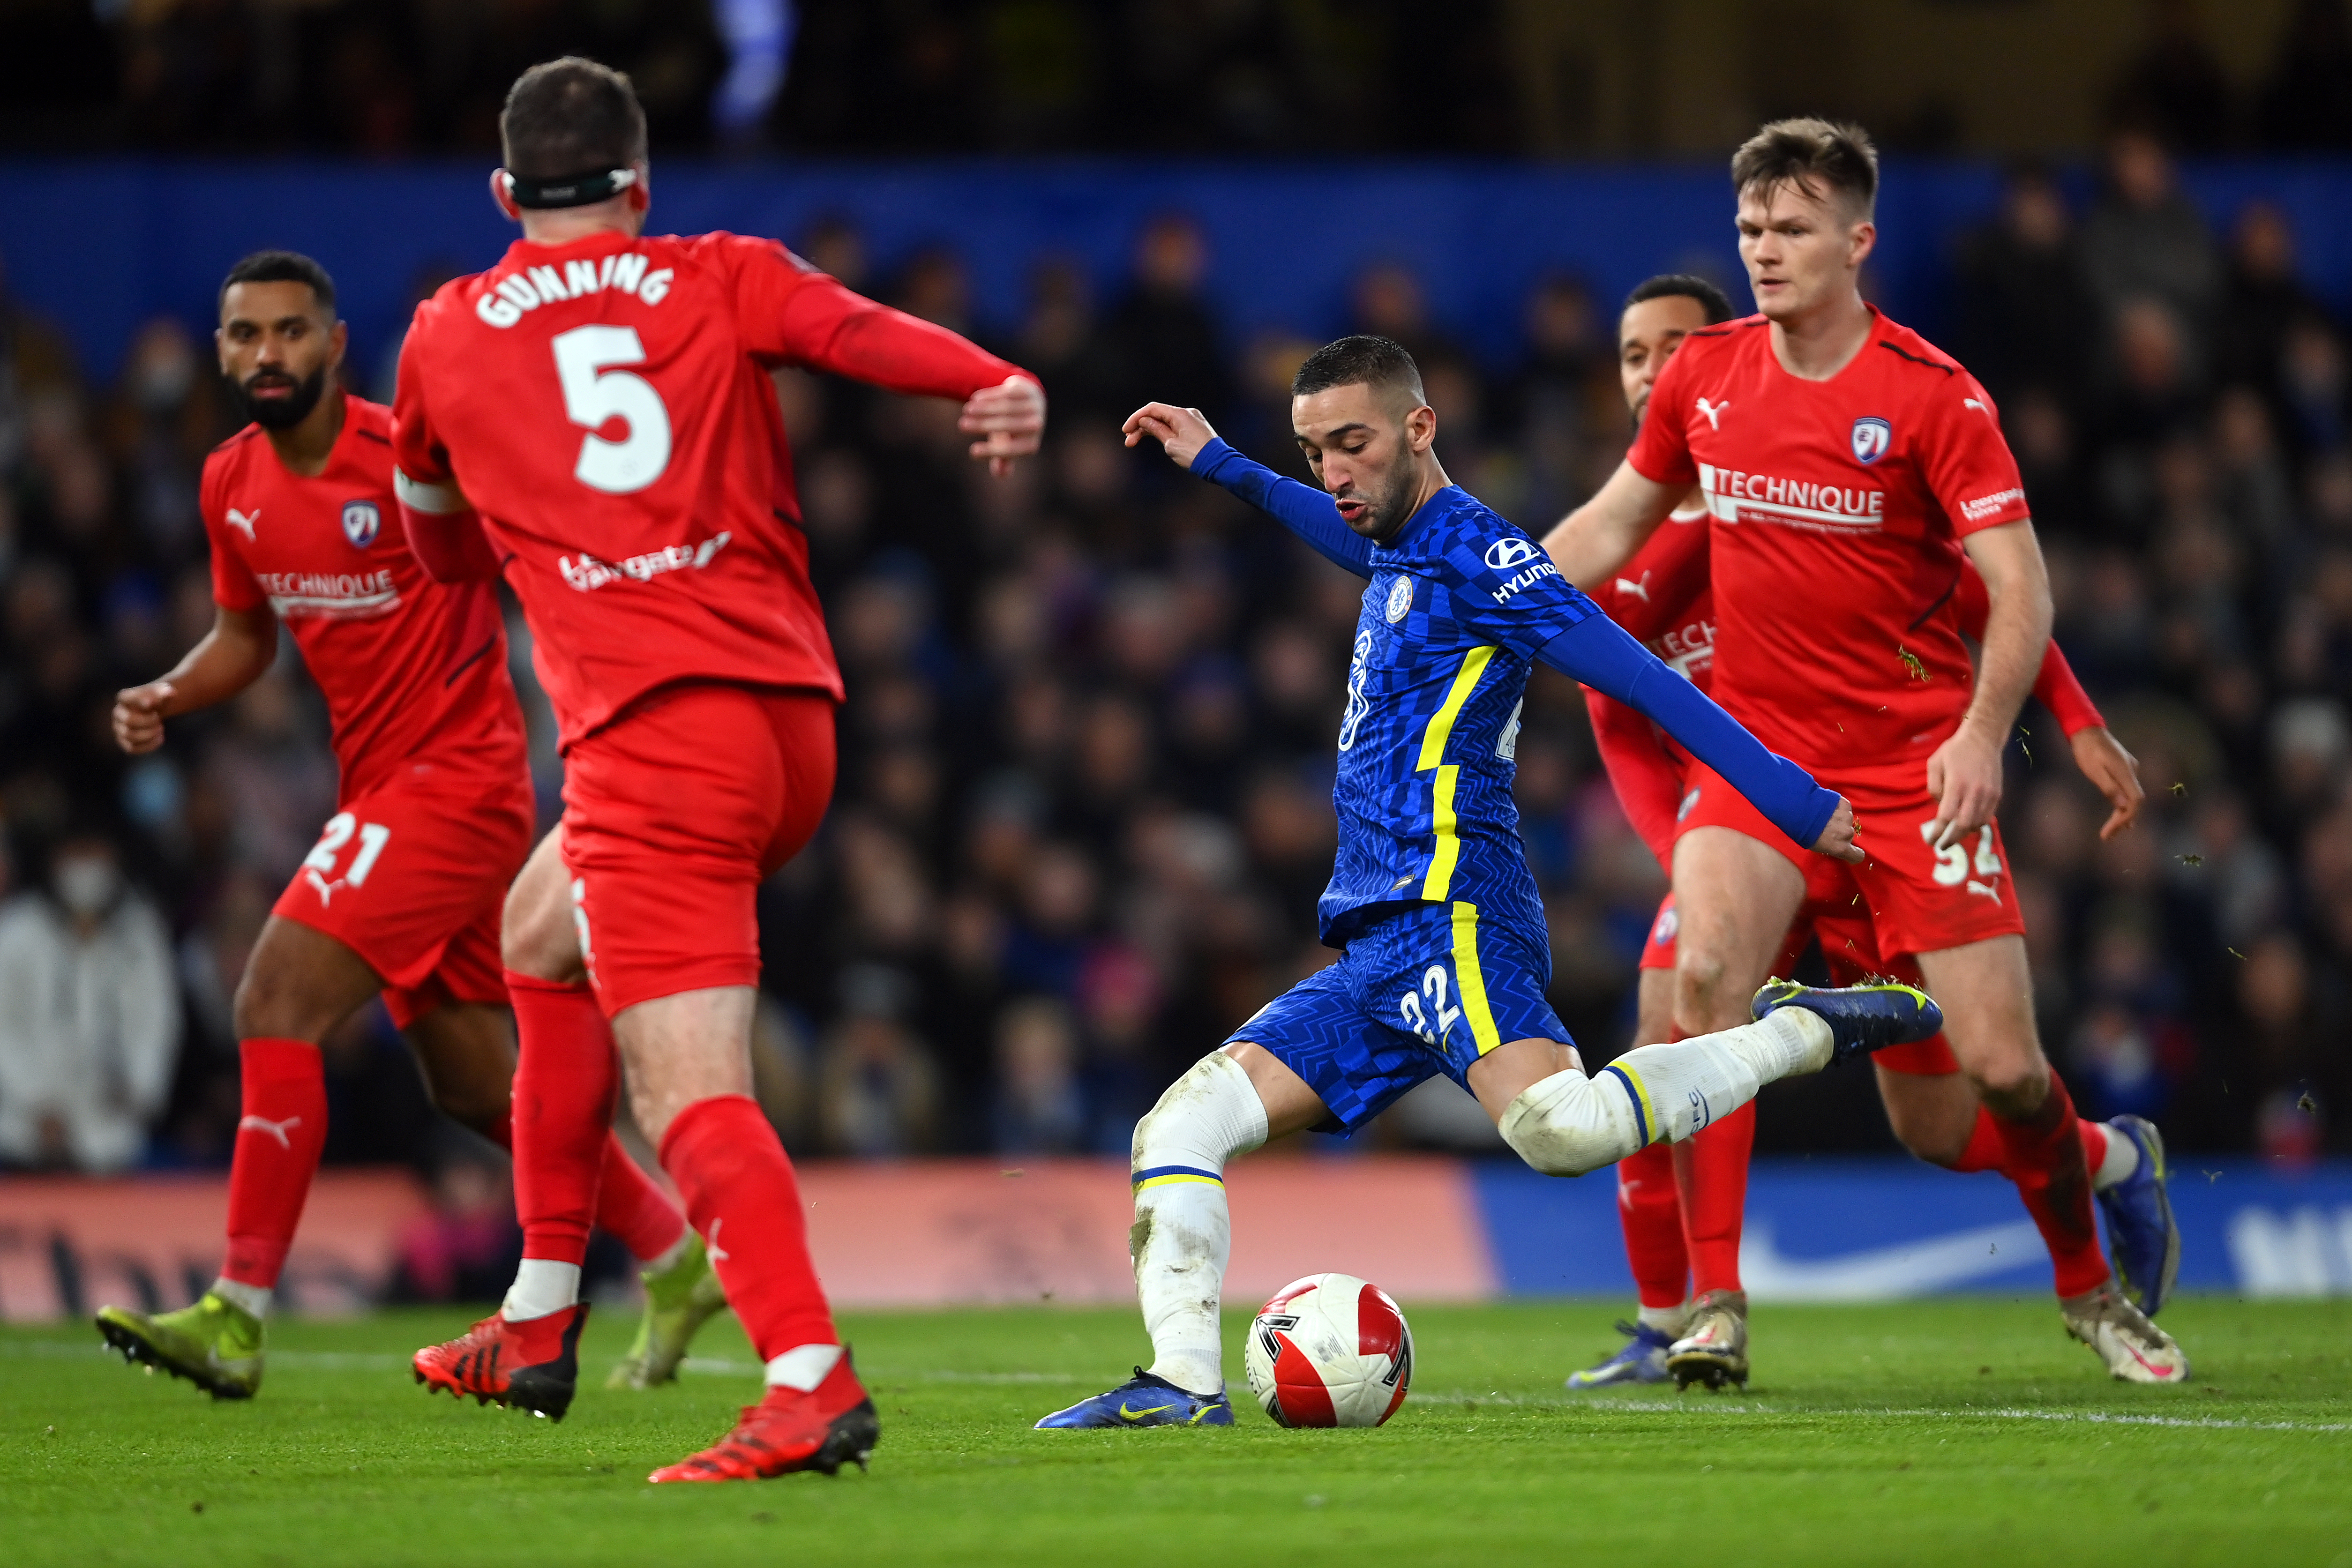 Chelsea v Chesterfield: The Emirates FA Cup Third Round